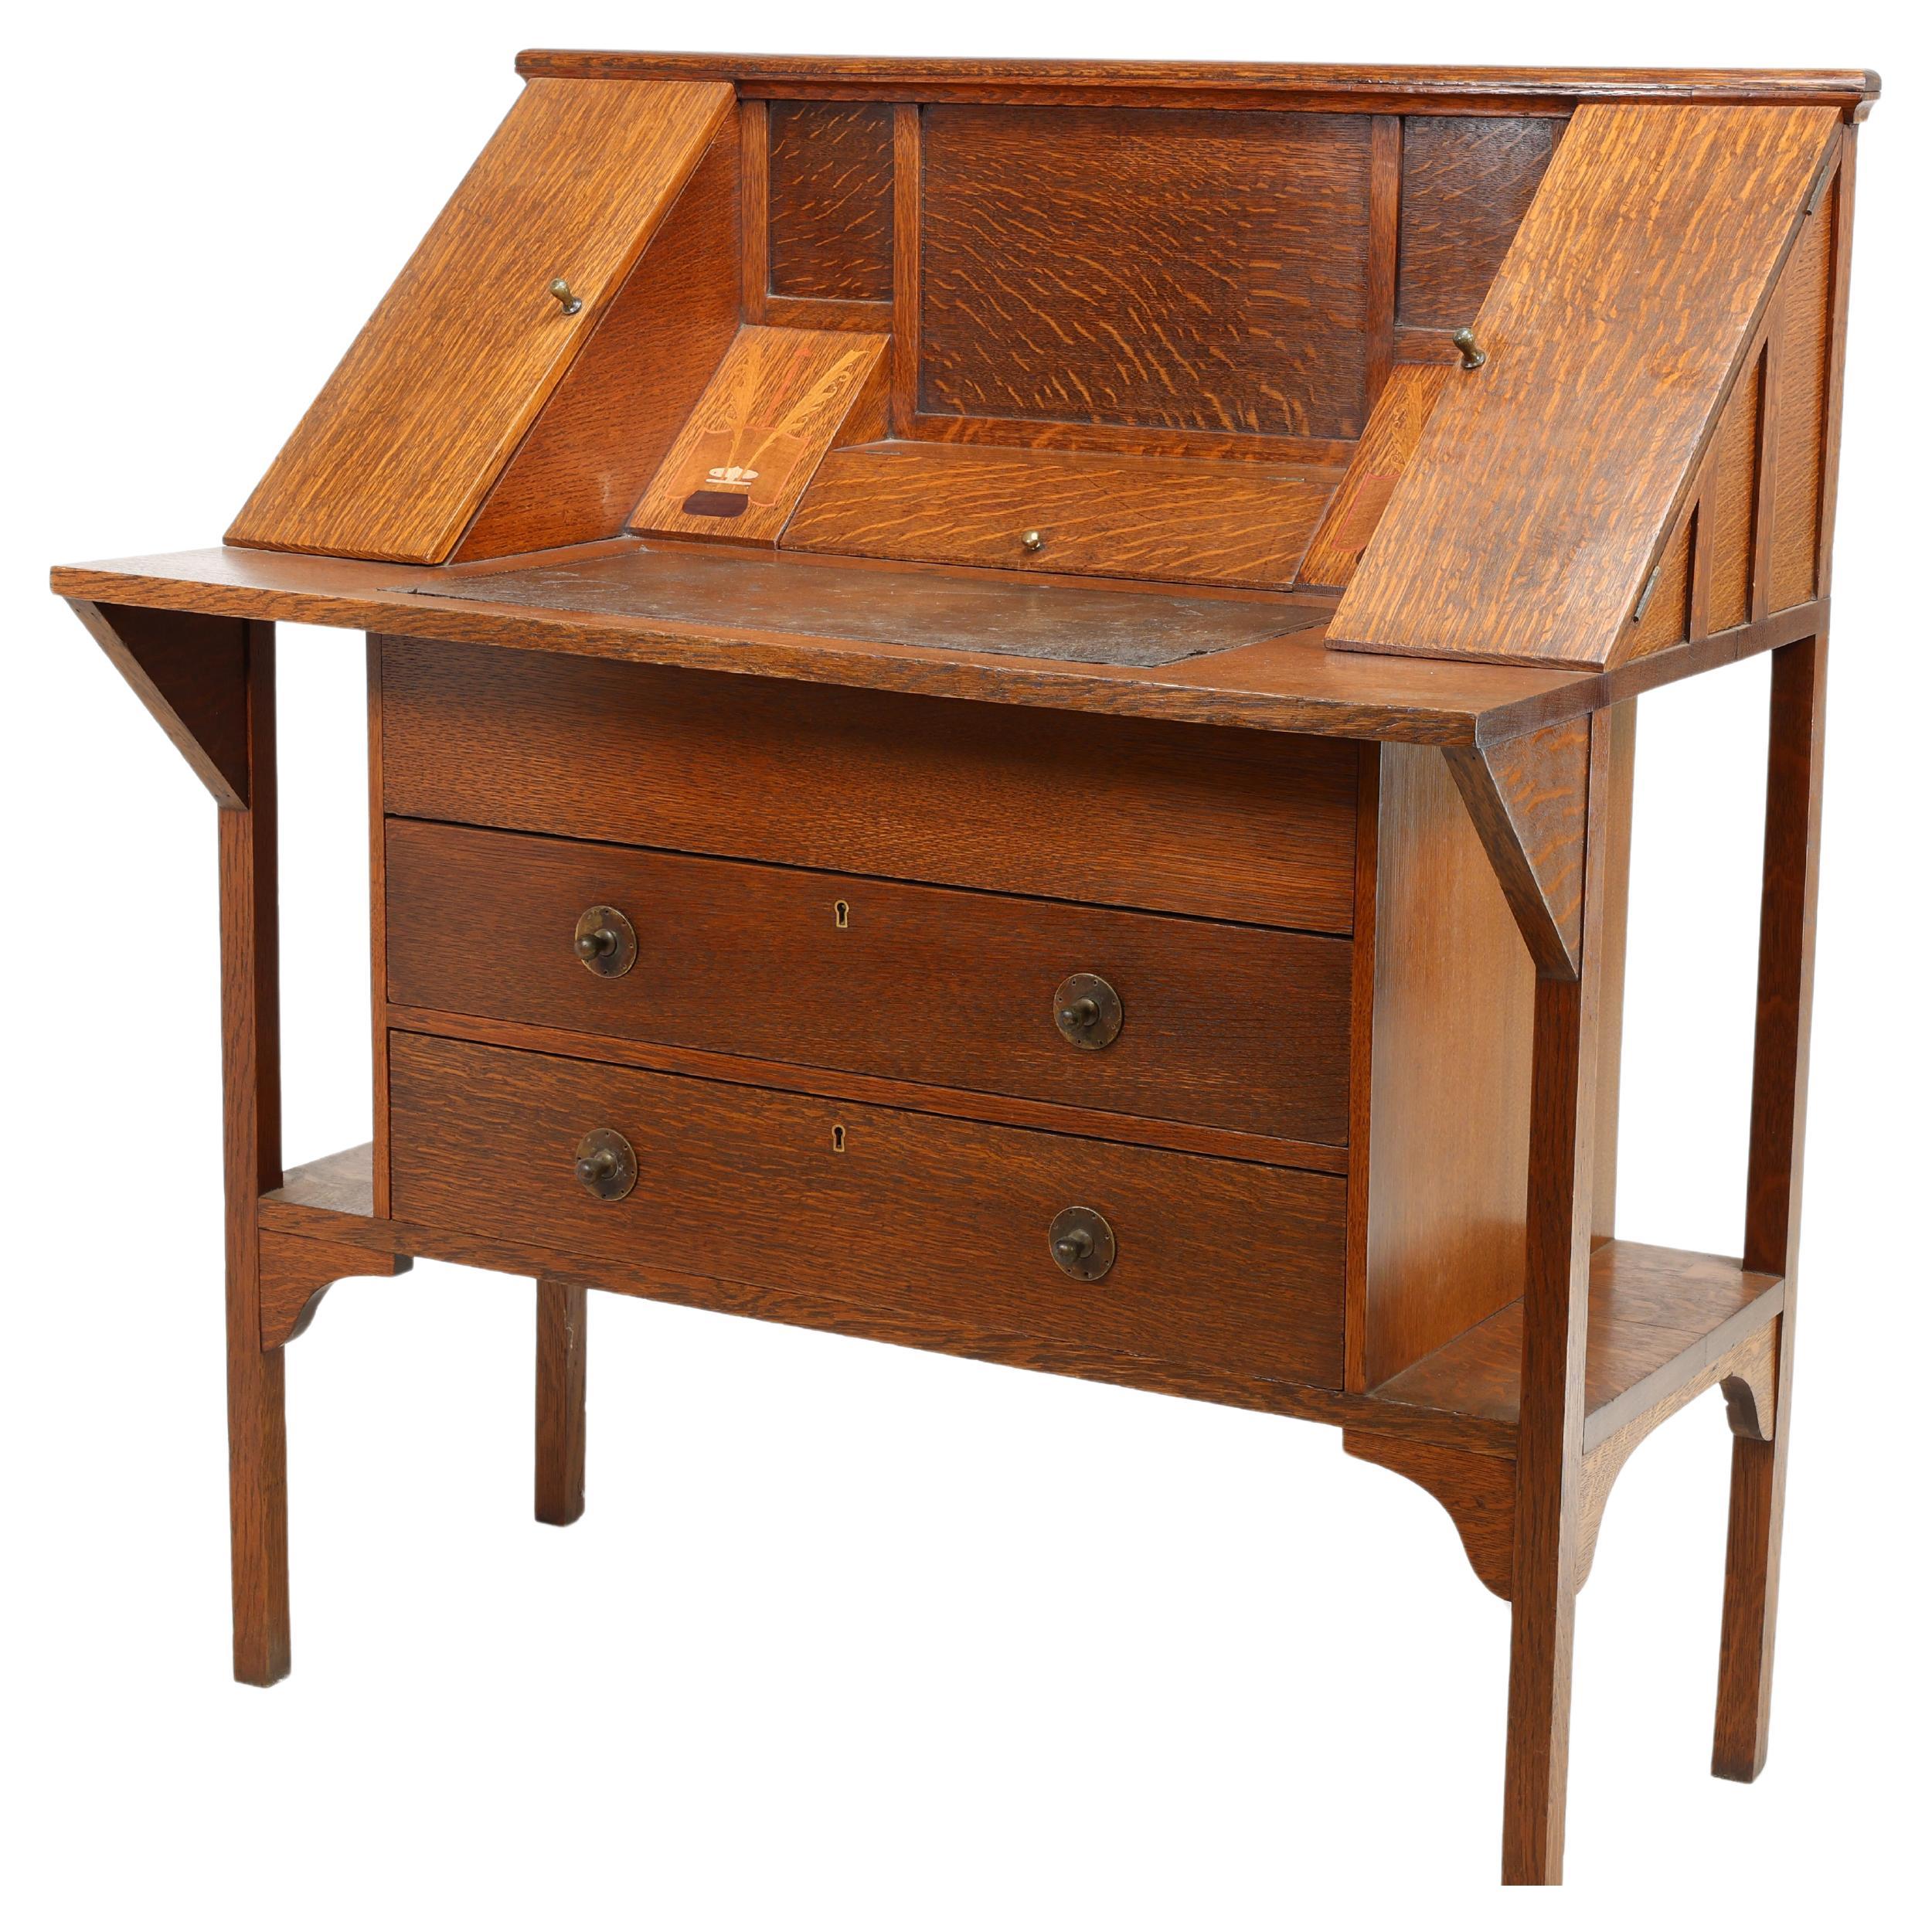 George Montague Ellwood (1875-1955) for J.S. Henry
An oak writing desk with sloping pen compartment just above the writing area flanked by stylised inlaid details of a pair of quills in ink pots the inlays of fruitwoods and copper, with fold out